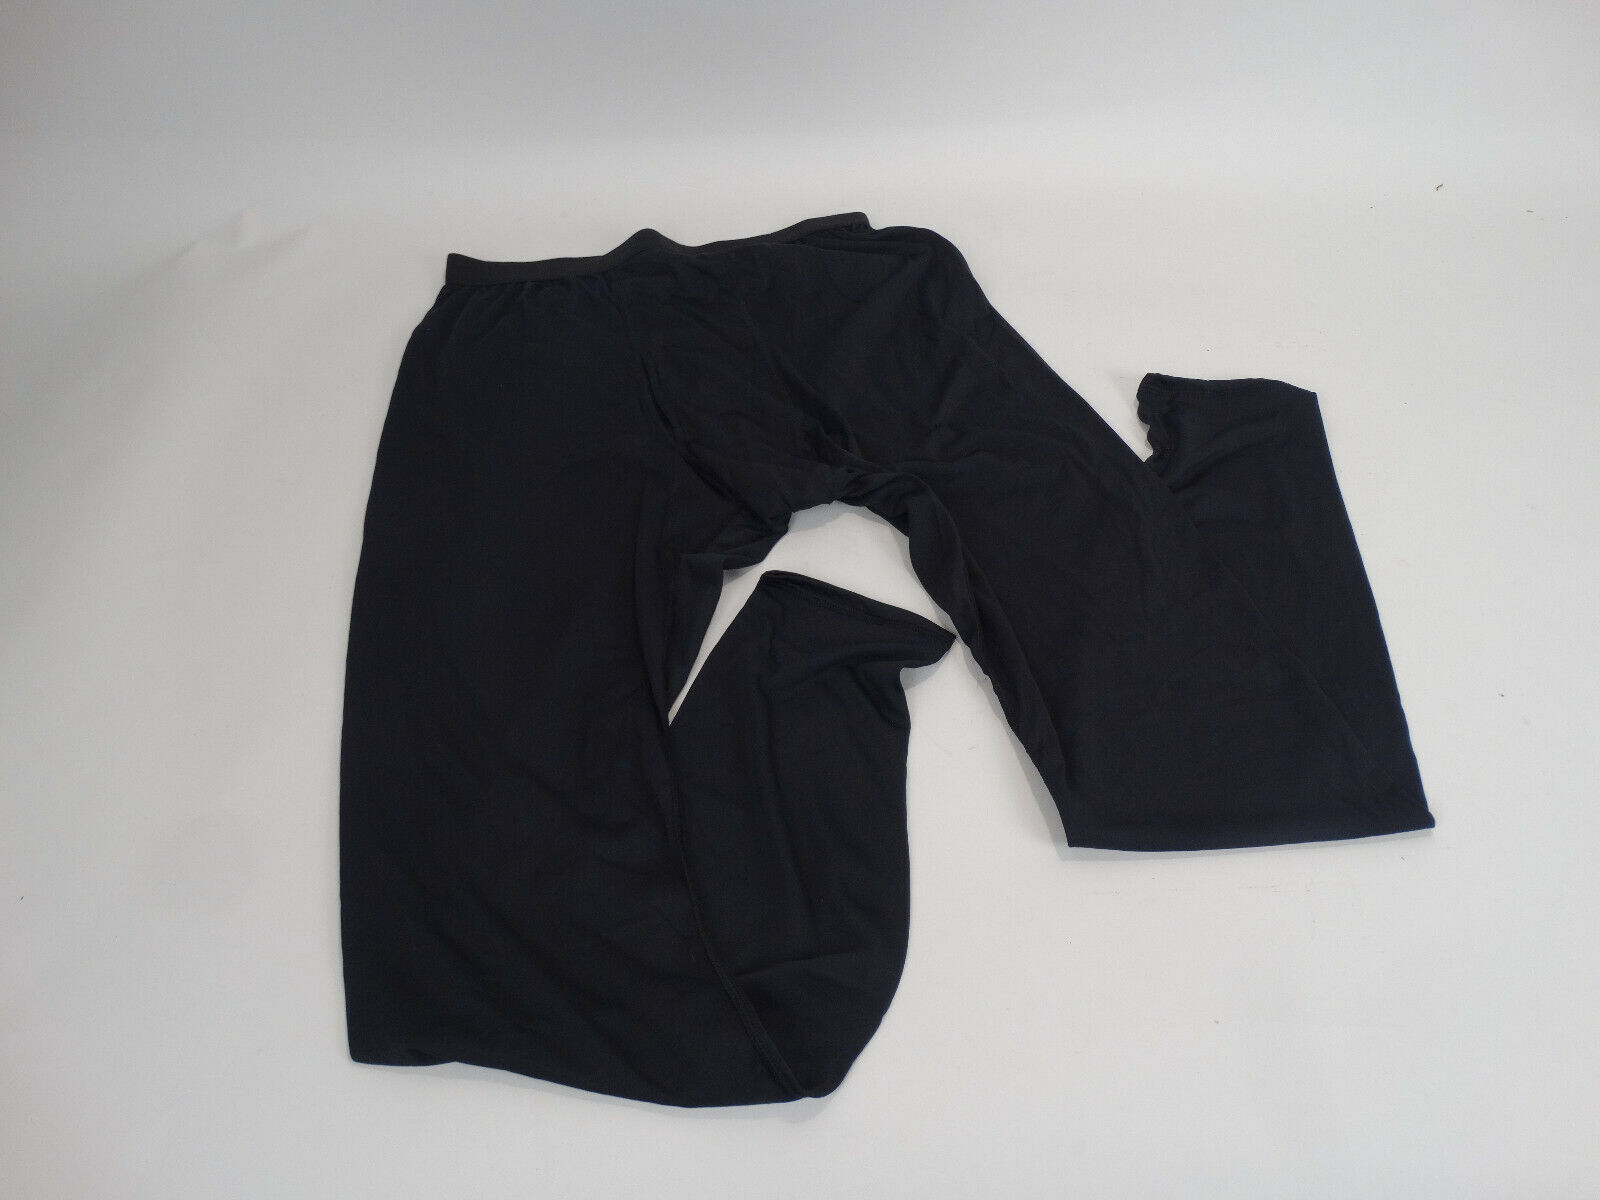 Polartec Layer 1 Silkweight Long Underwear Power Dry 100% Polyester Drawers L-L